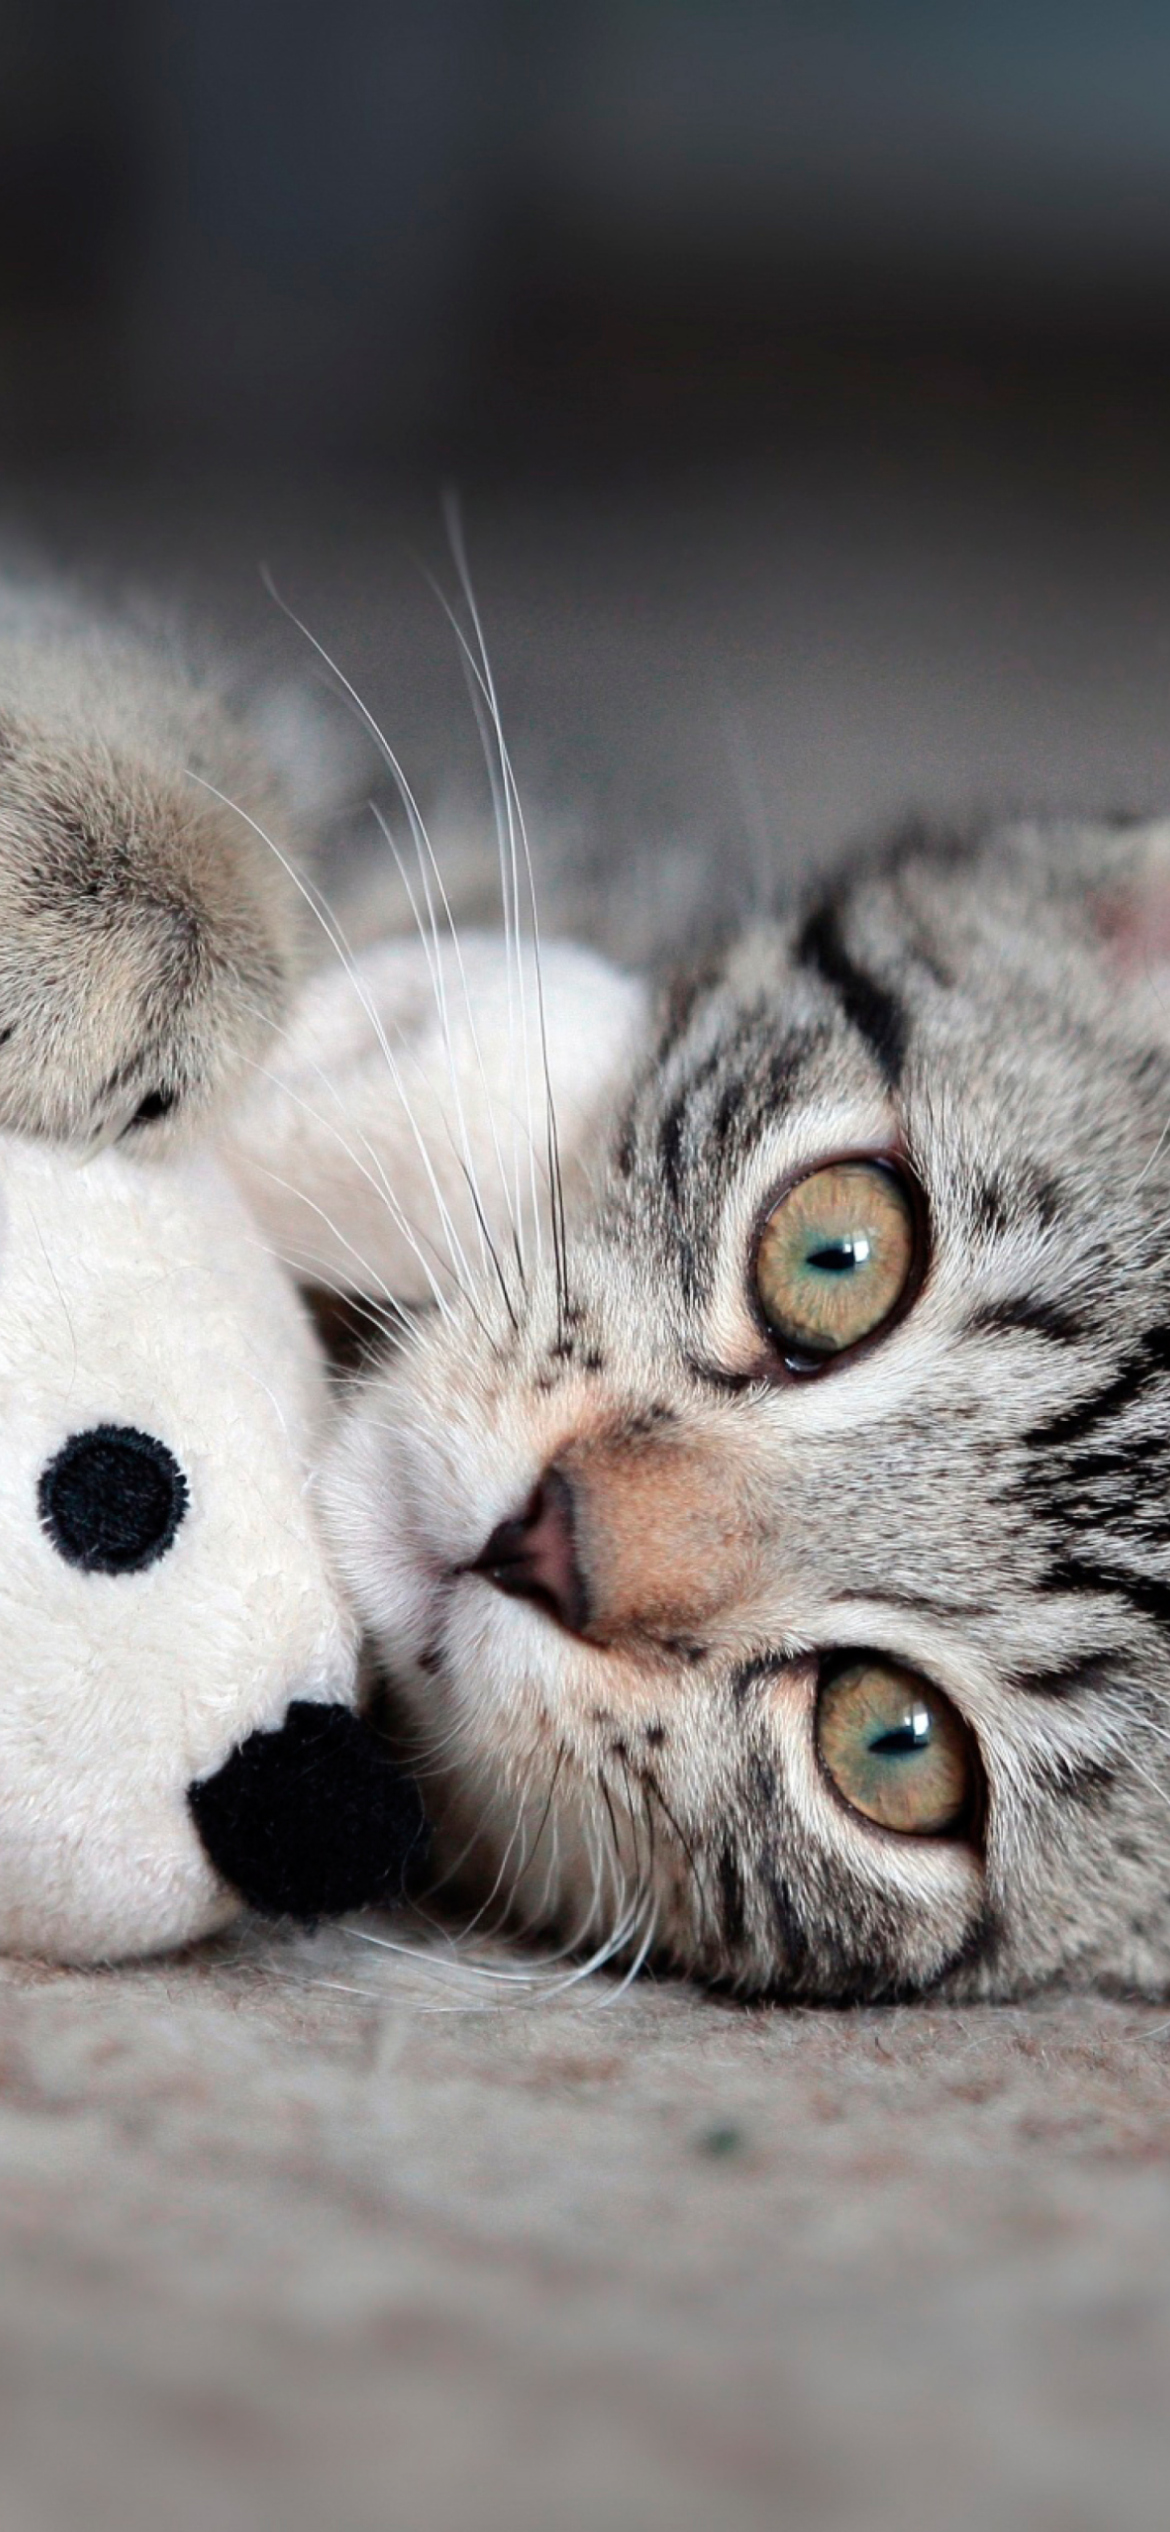 Adorable Kitten With Toy Mouse wallpaper 1170x2532